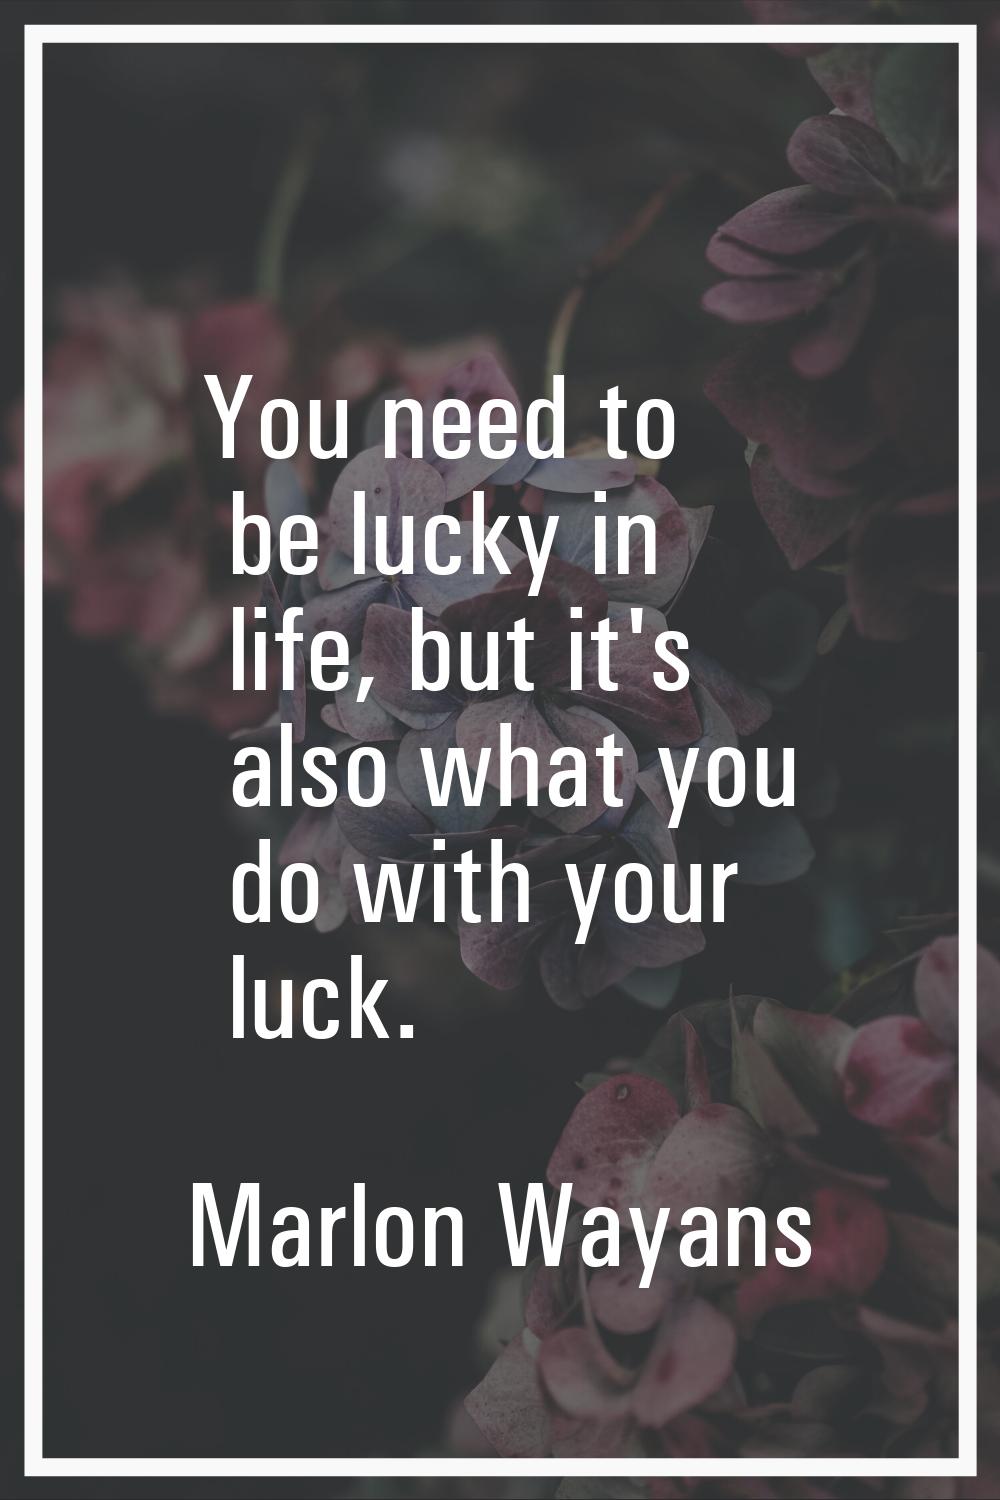 You need to be lucky in life, but it's also what you do with your luck.